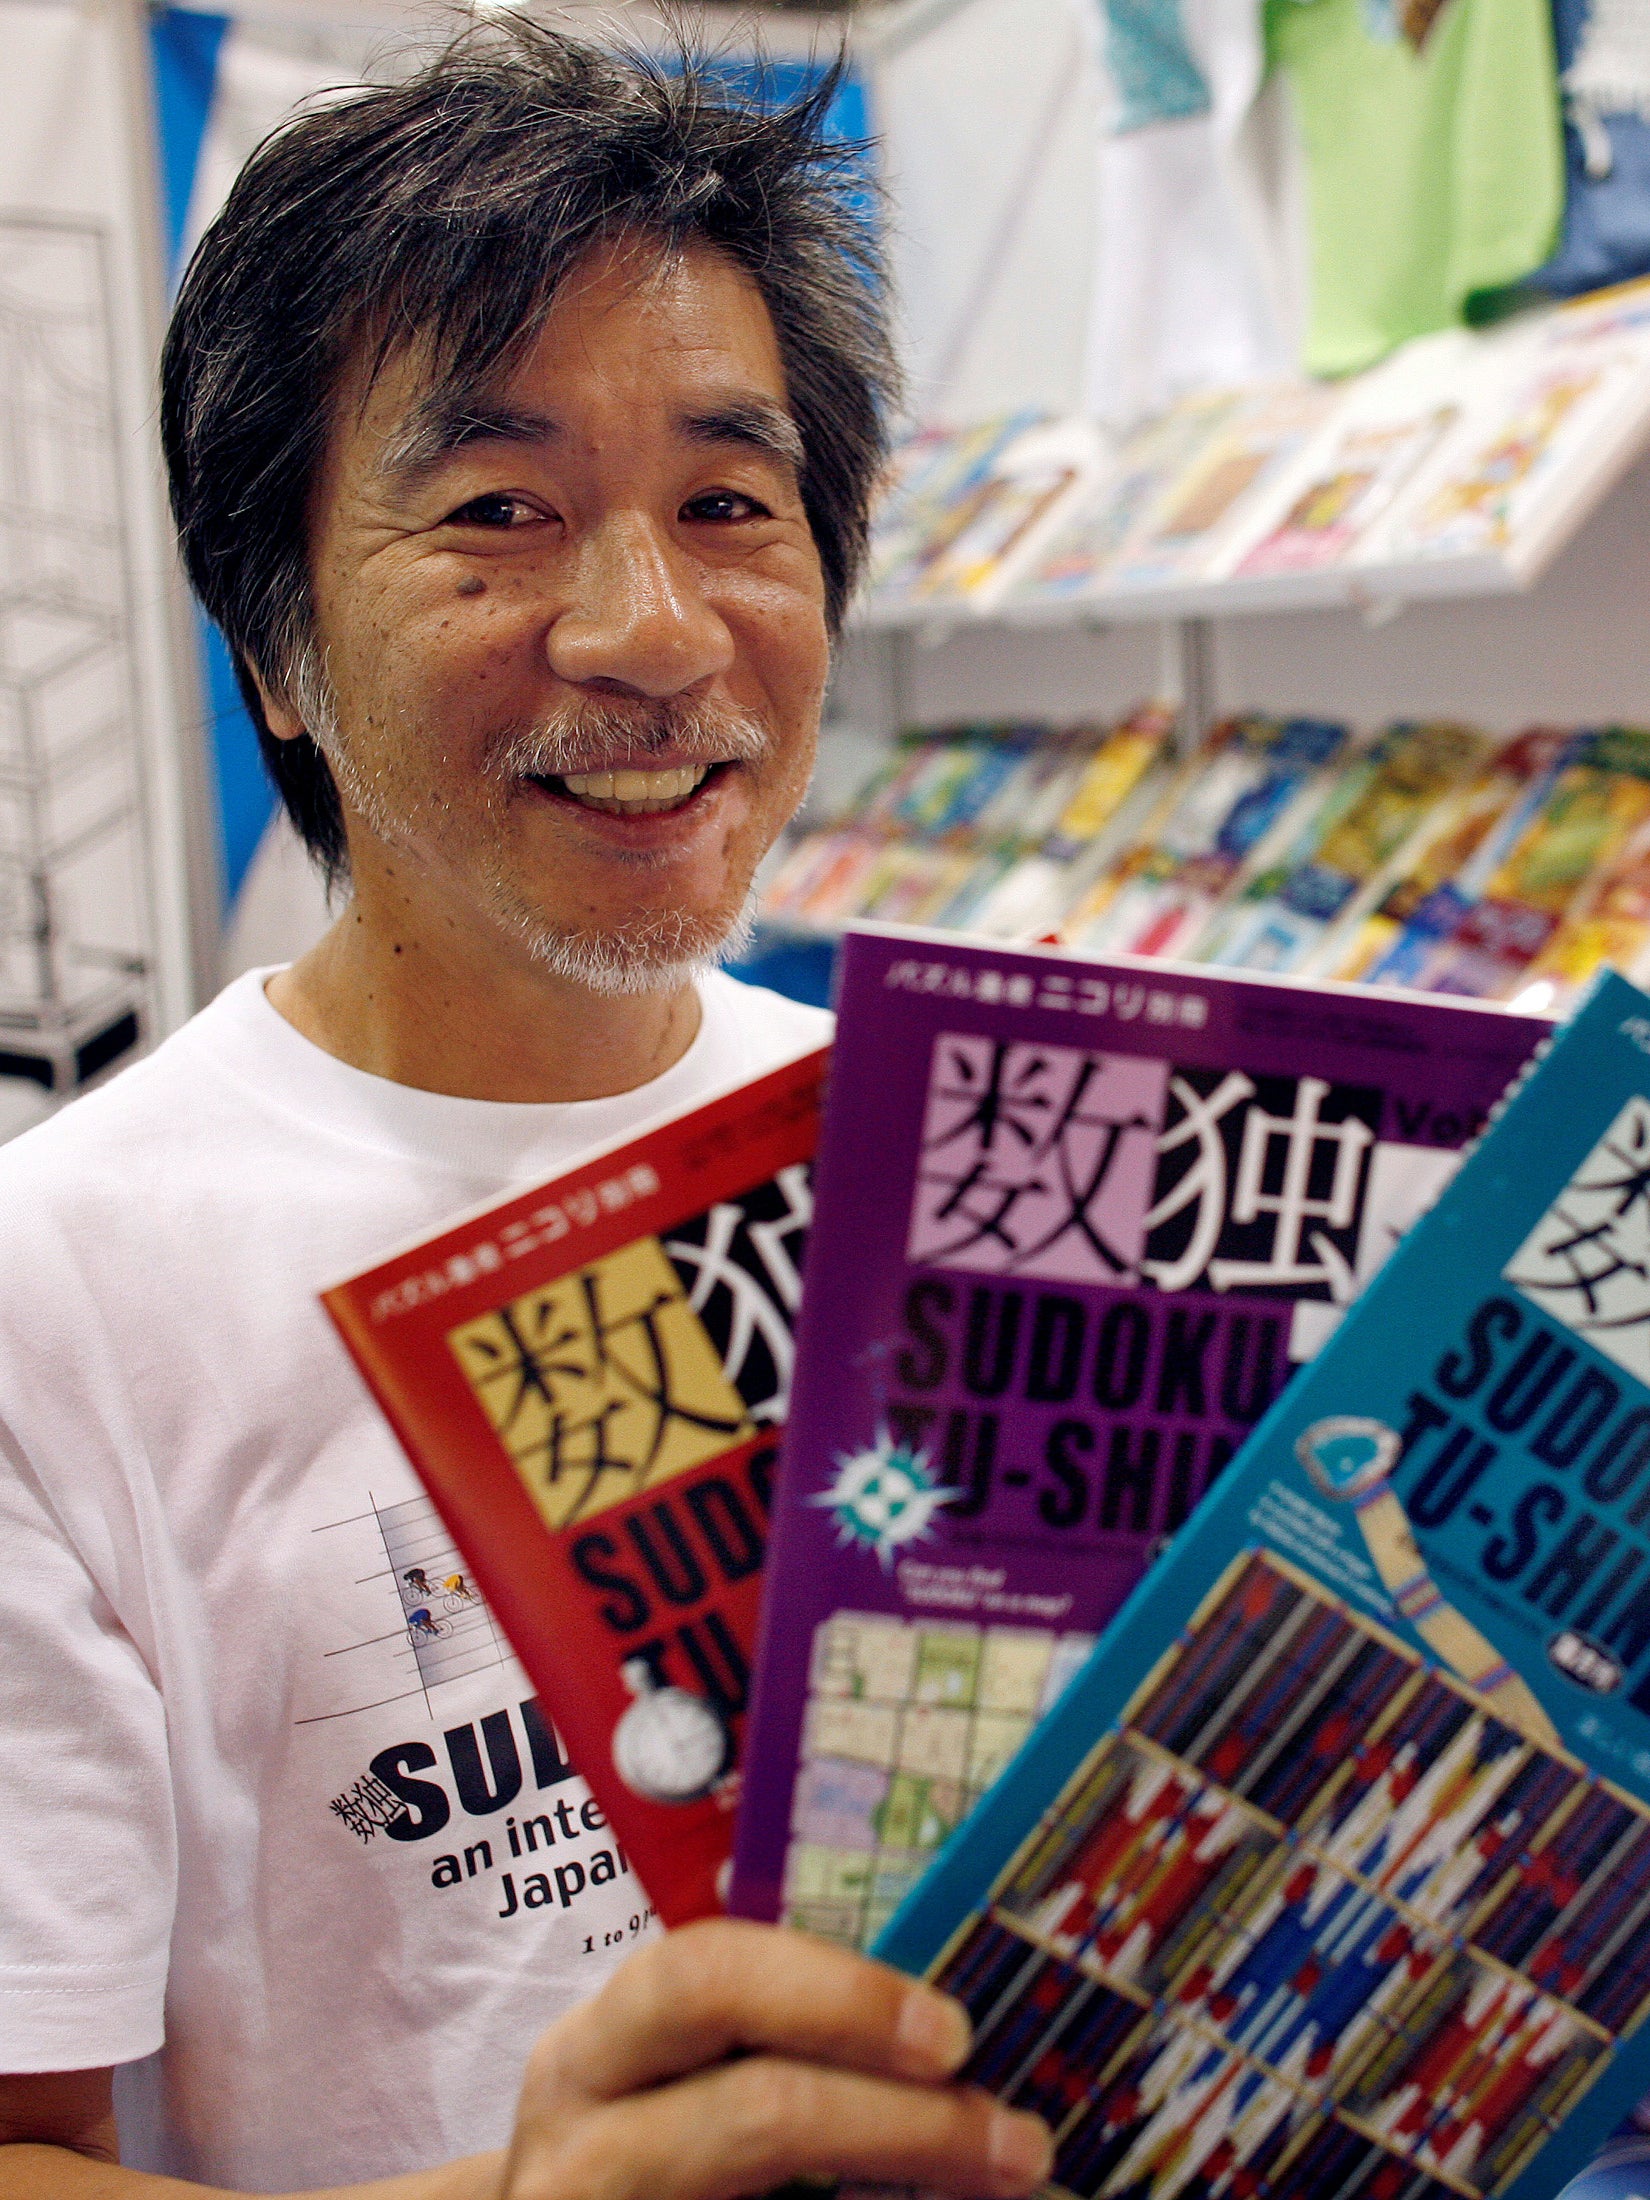 Kaji holds copies of the latest sudoku puzzles at the Book Expo, in New York, June 2007